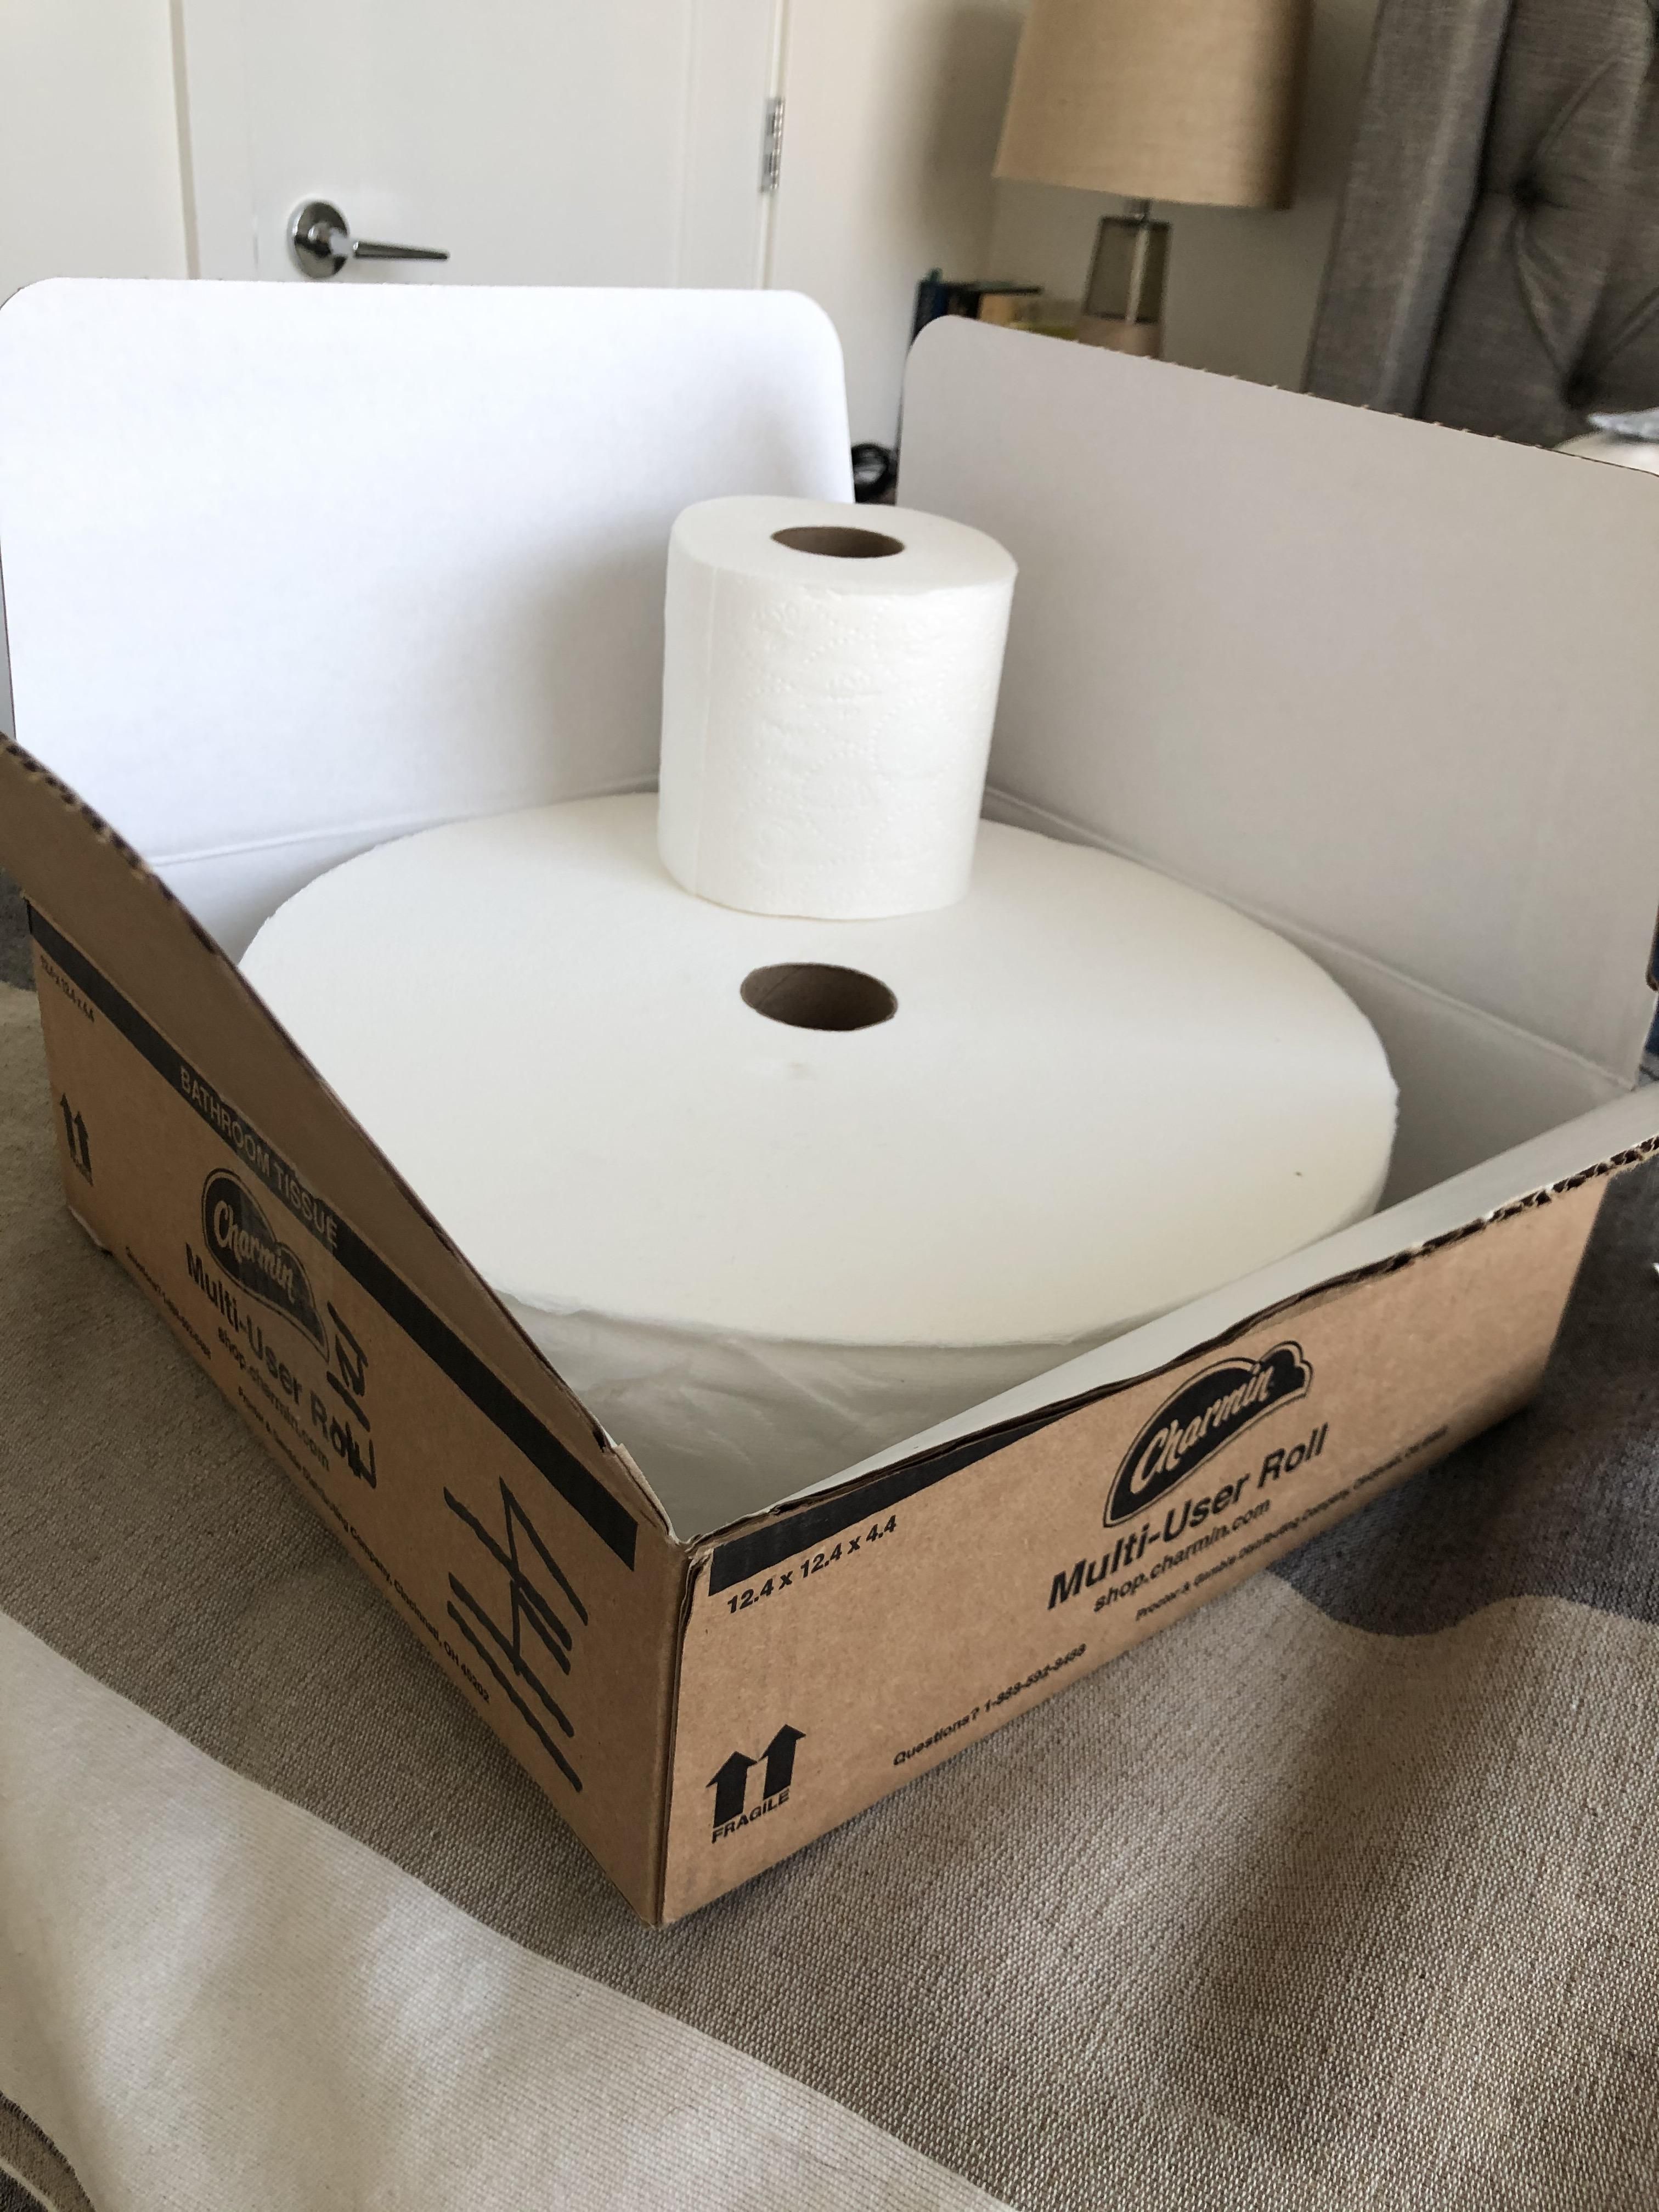 Got this big roll of toilet paper as a gag gift for Christmas. Whose laughing now!?